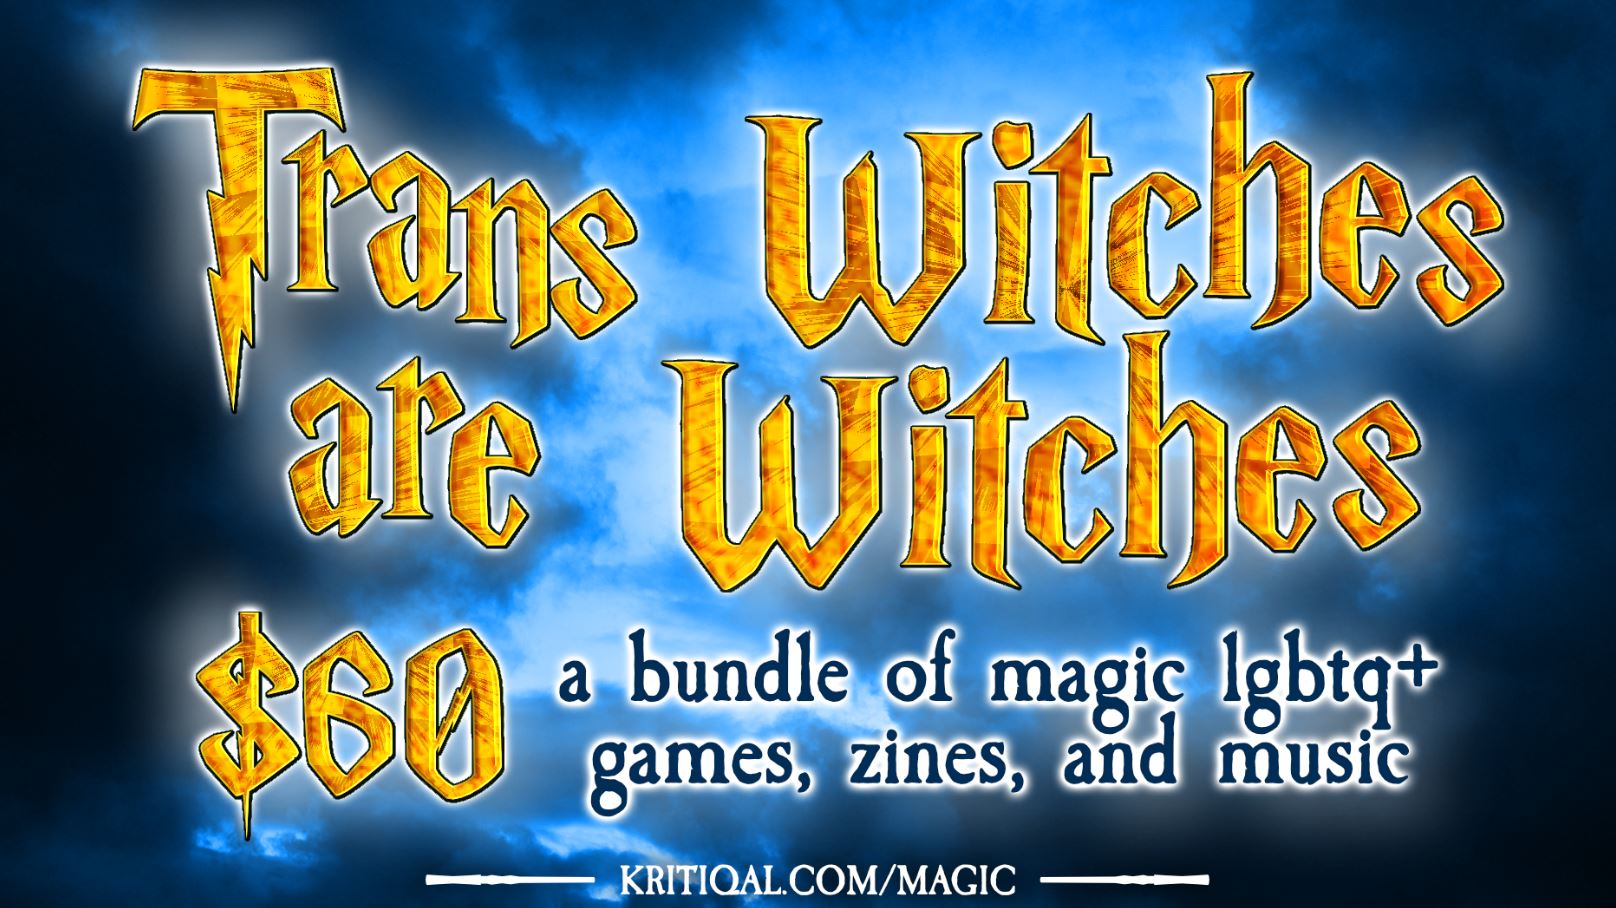 Trans Witches are Witches